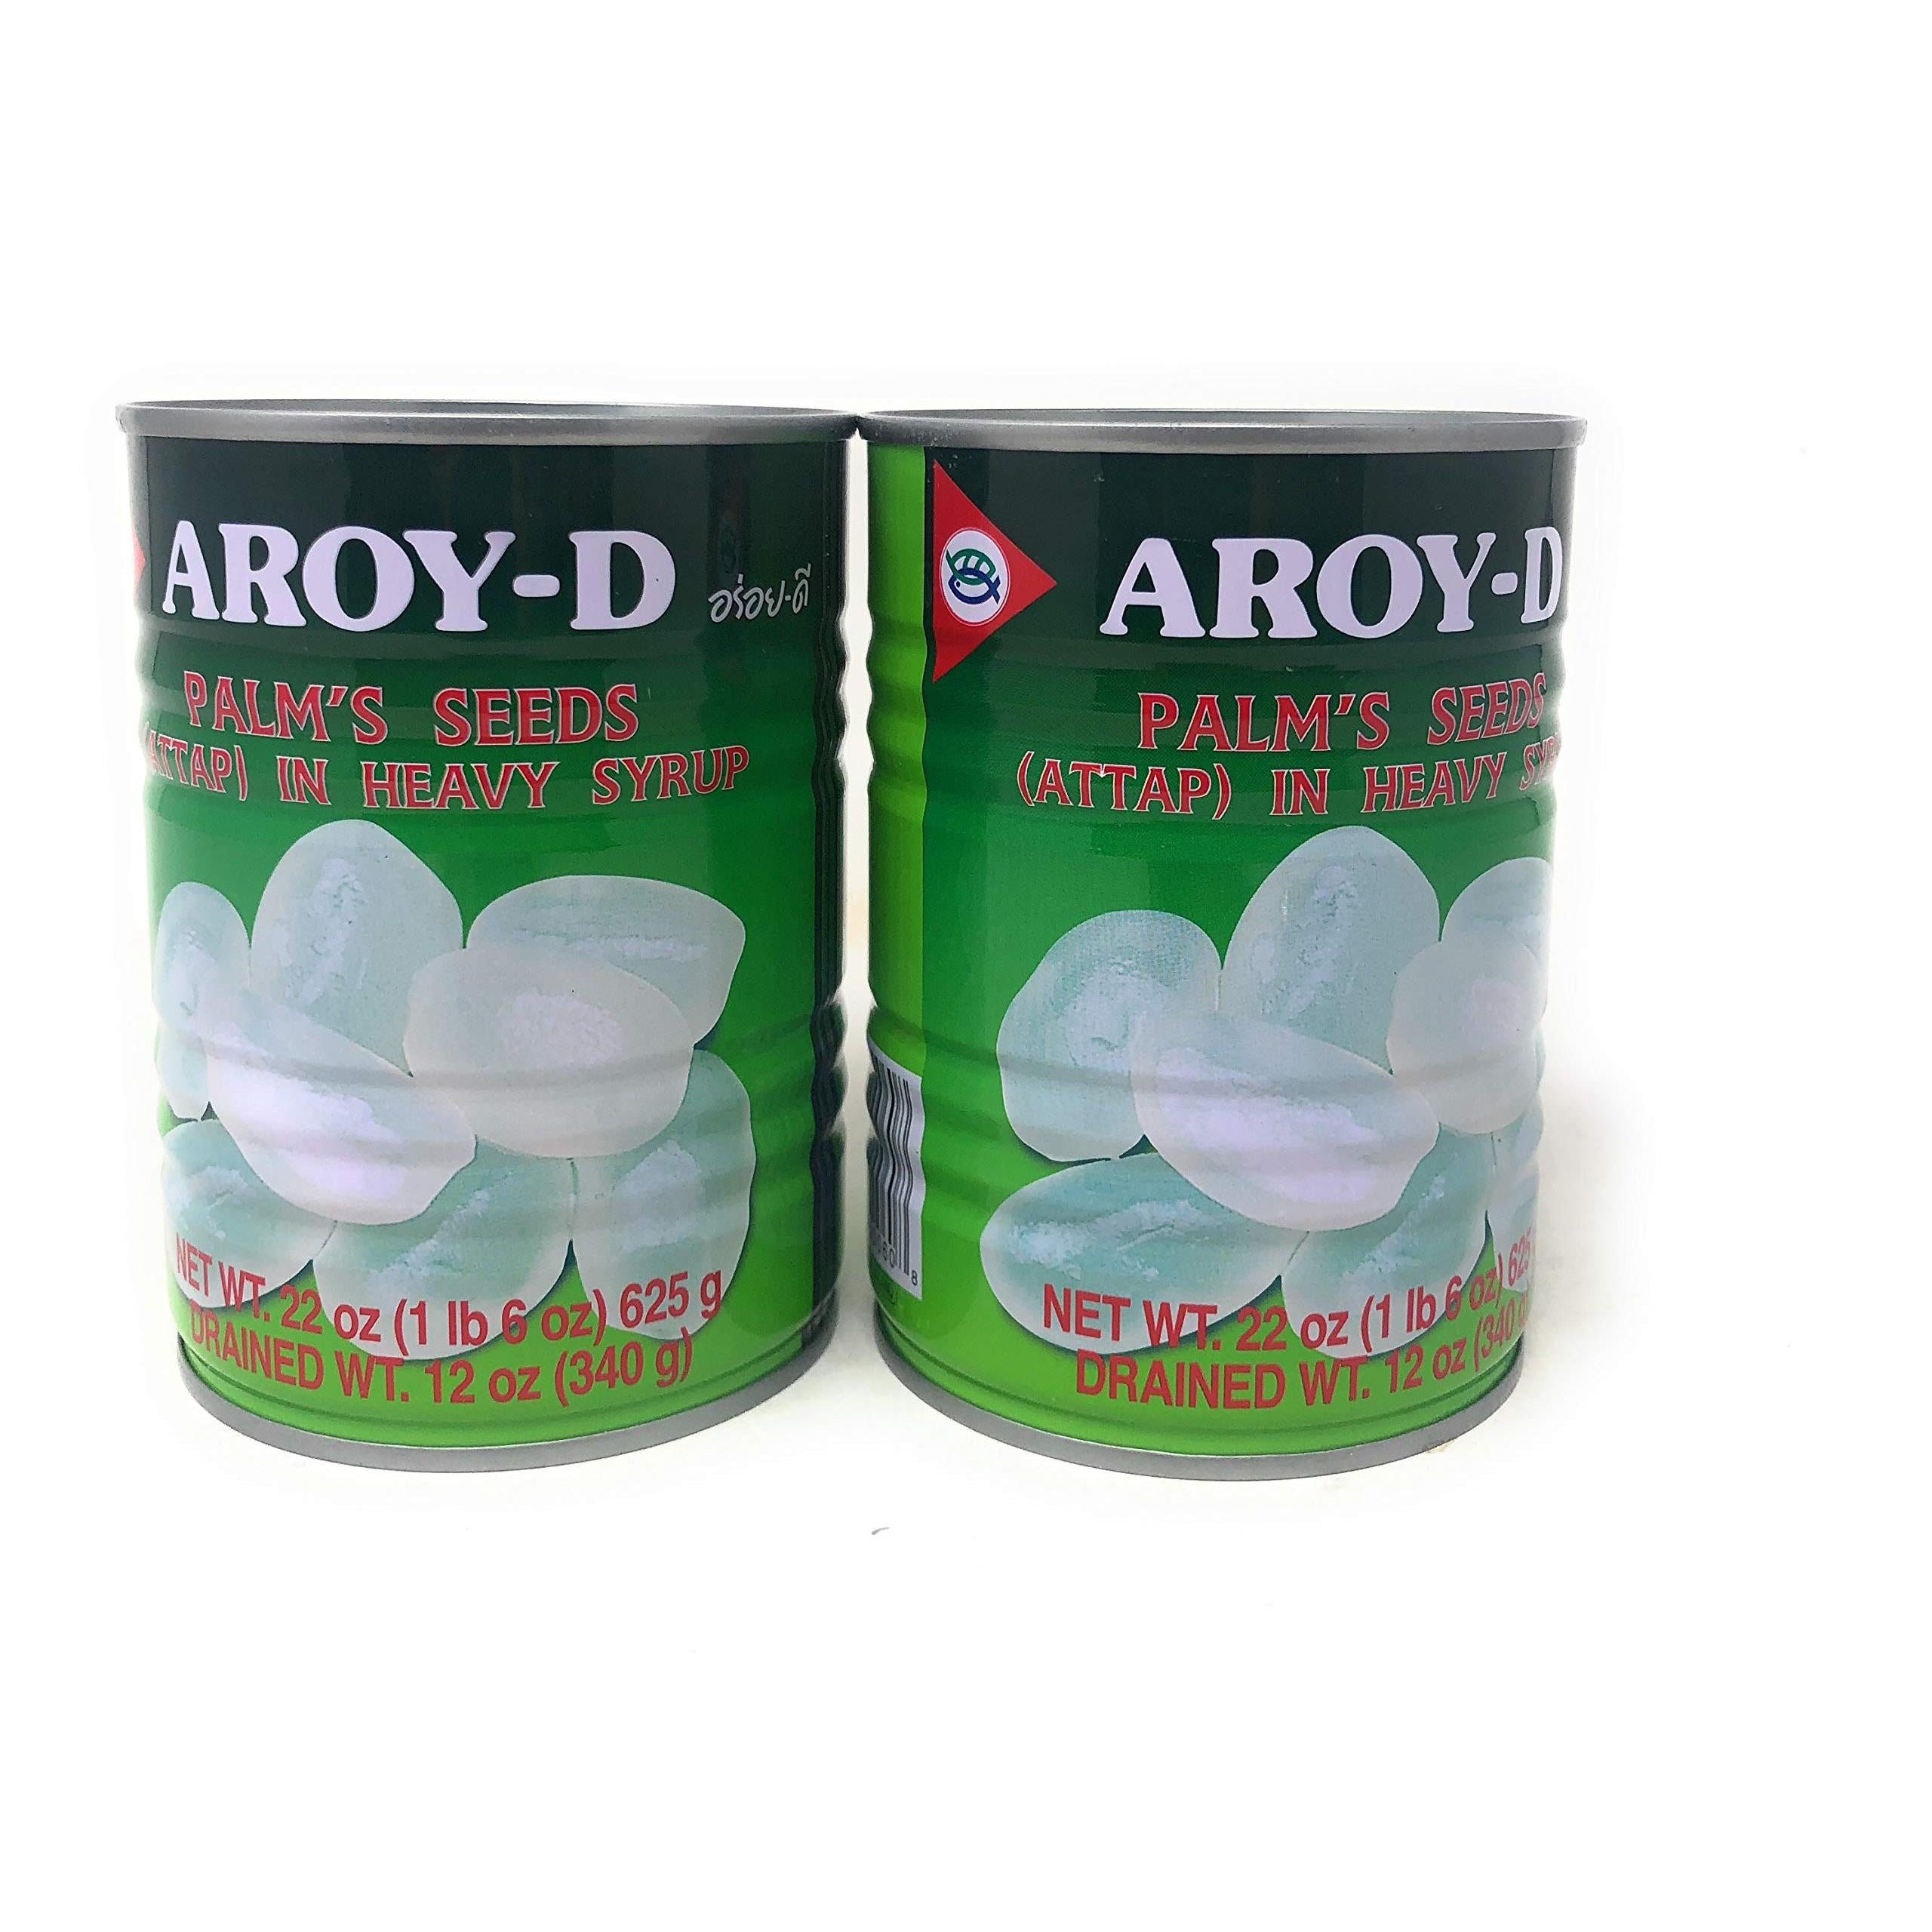 Aroy-d Palms Seeds (attap) in Heavy Syrup 22oz (Pack of 2)